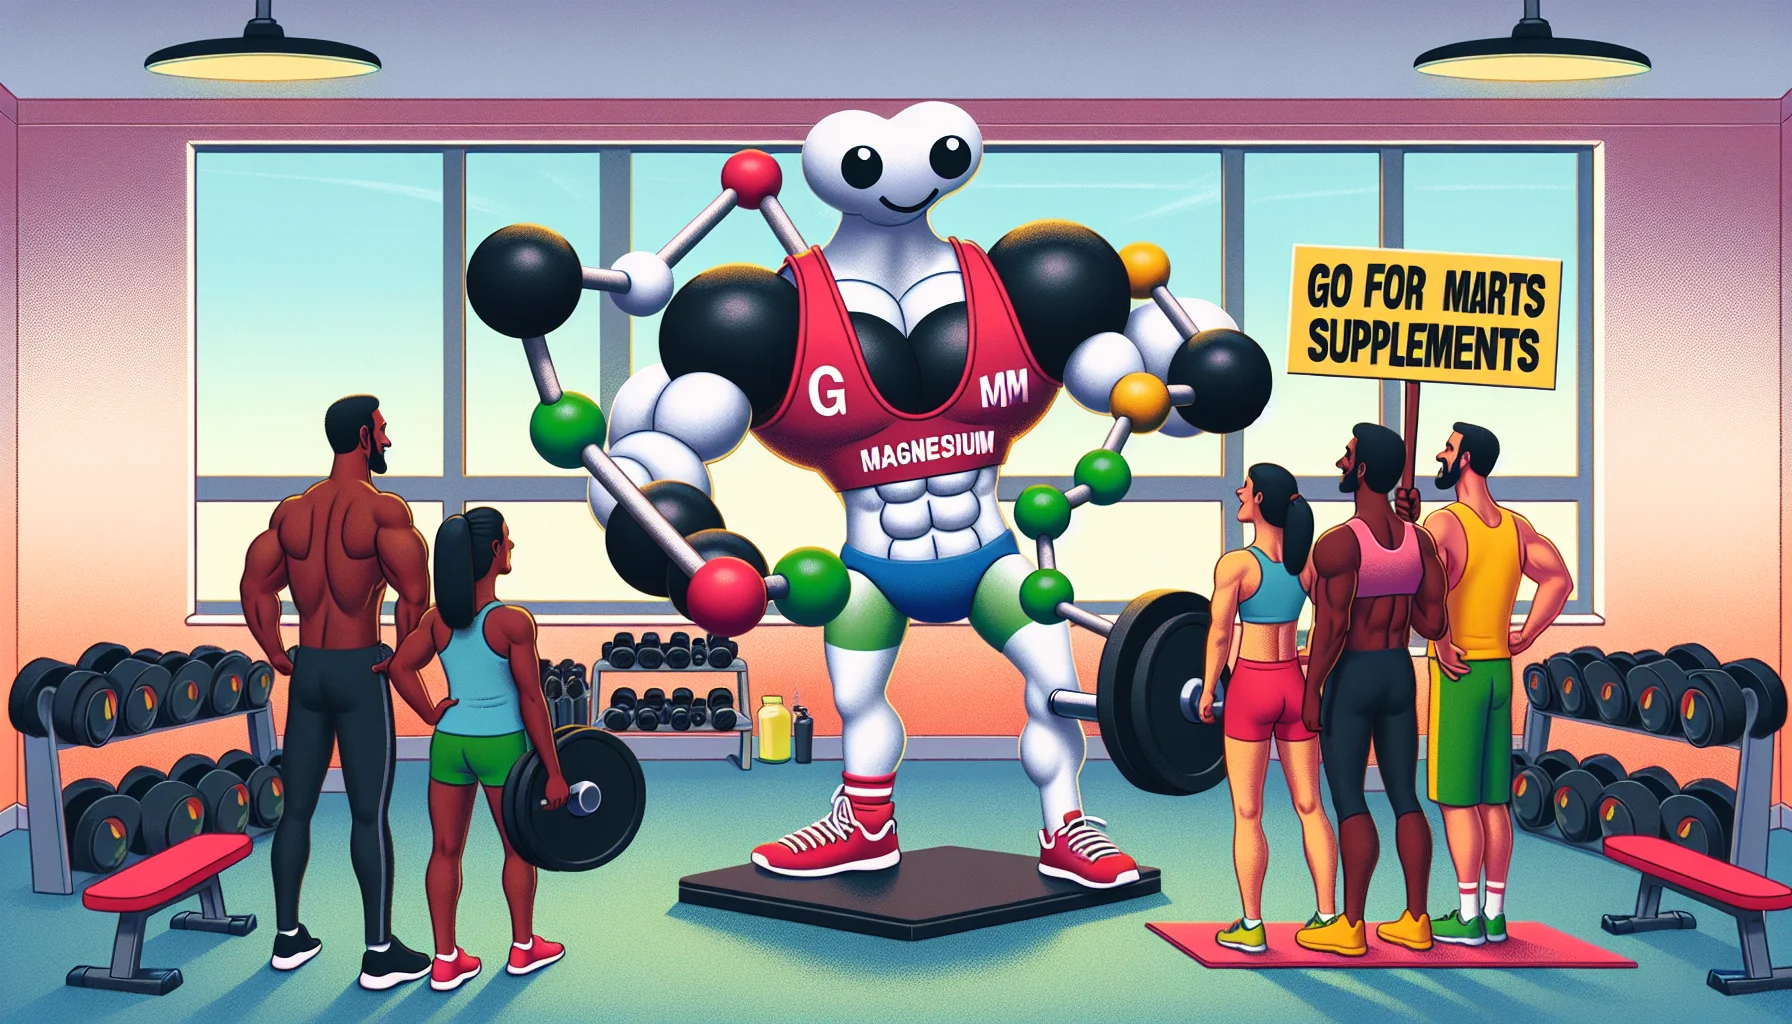 Imagine a humorous scene featuring a personified magnesium amino acid chelate. This molecule wears a gym outfit and lifts weights, showing off its strong chemical bonds as muscles, standing in a vibrant gym setting. It converses in a friendly manner to a diverse group of athletes of various genders and descents, including a female Black marathon runner, a Middle-Eastern male weightlifter, and a Hispanic yogi. It holds a banner that displays 'Go for Sports Supplements', reinforcing the value of such supplements for athletic performance. The scene is filled with light-hearted humor and comical elements to make the idea of supplements appealing.